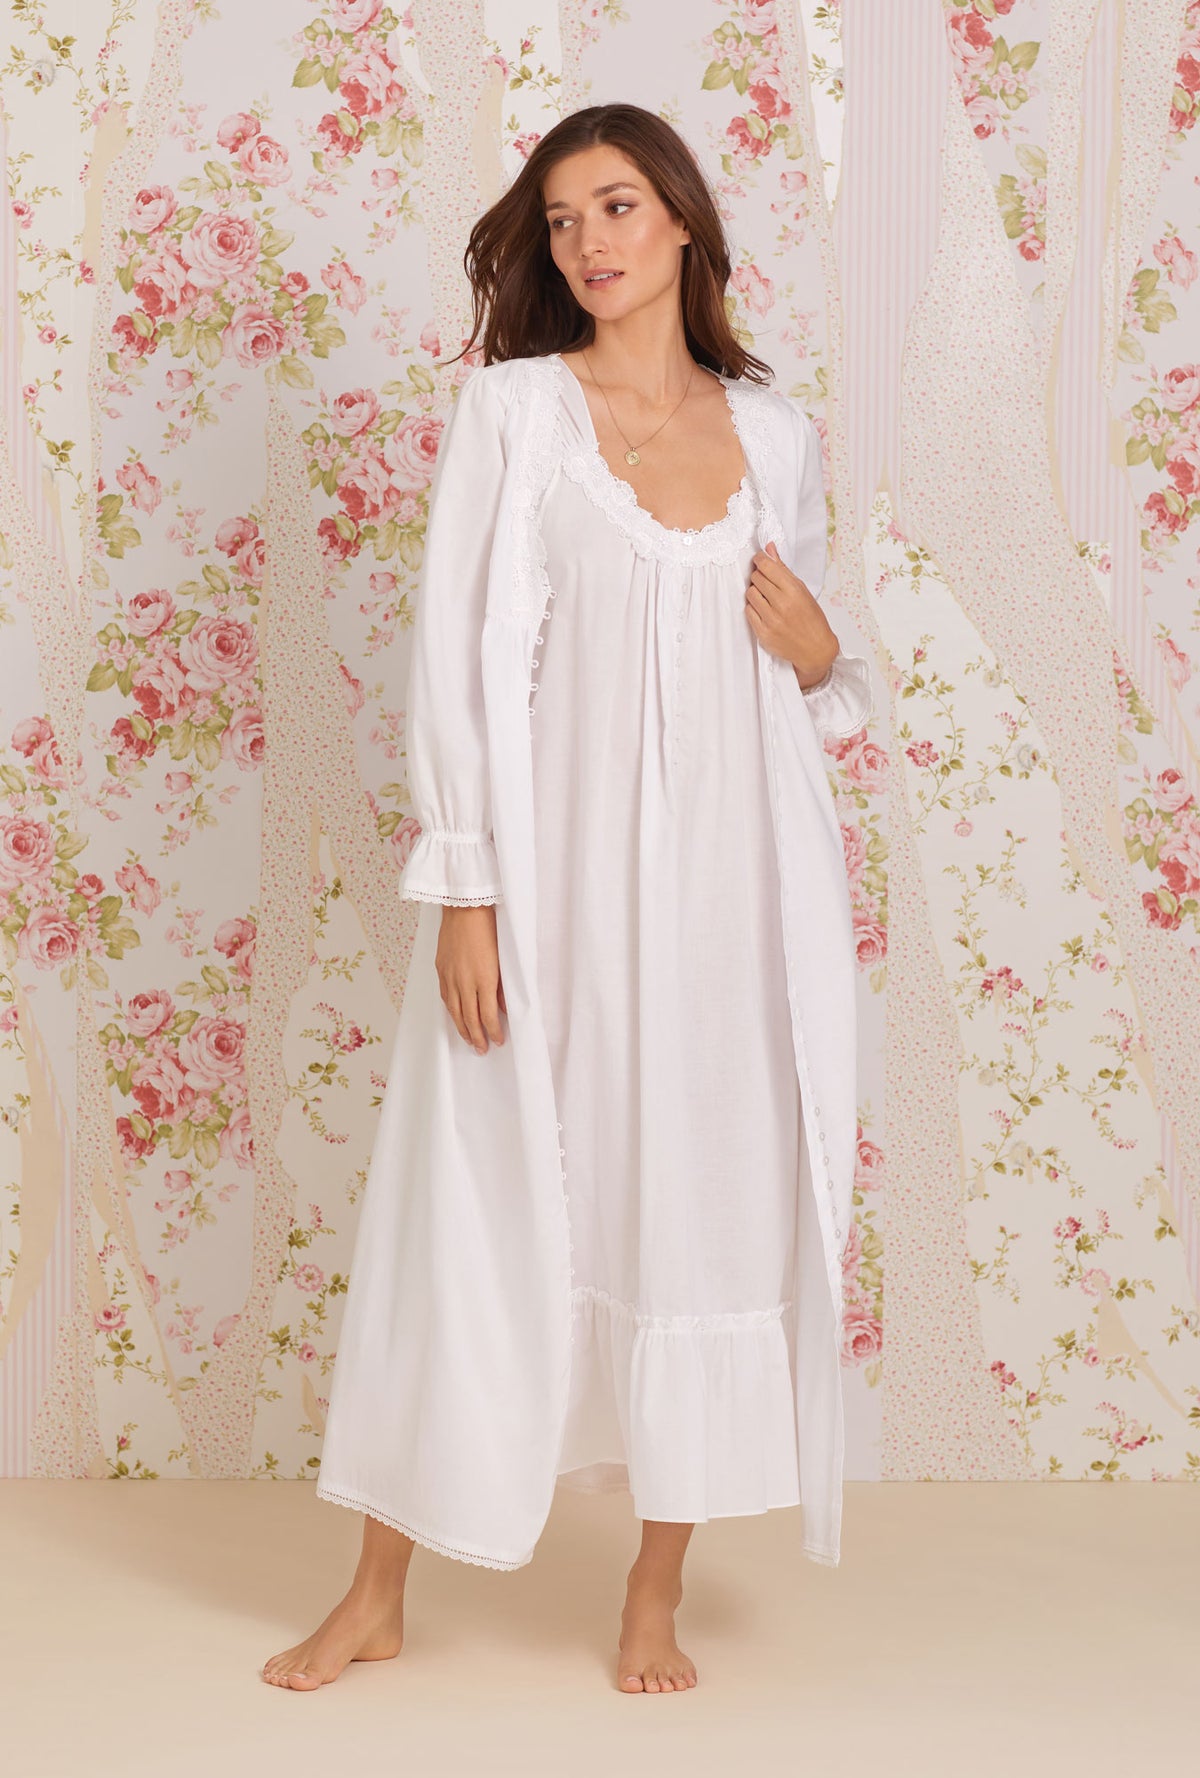 A lady wearing white cap sleeve tabitha calla lily cotton nightgown.